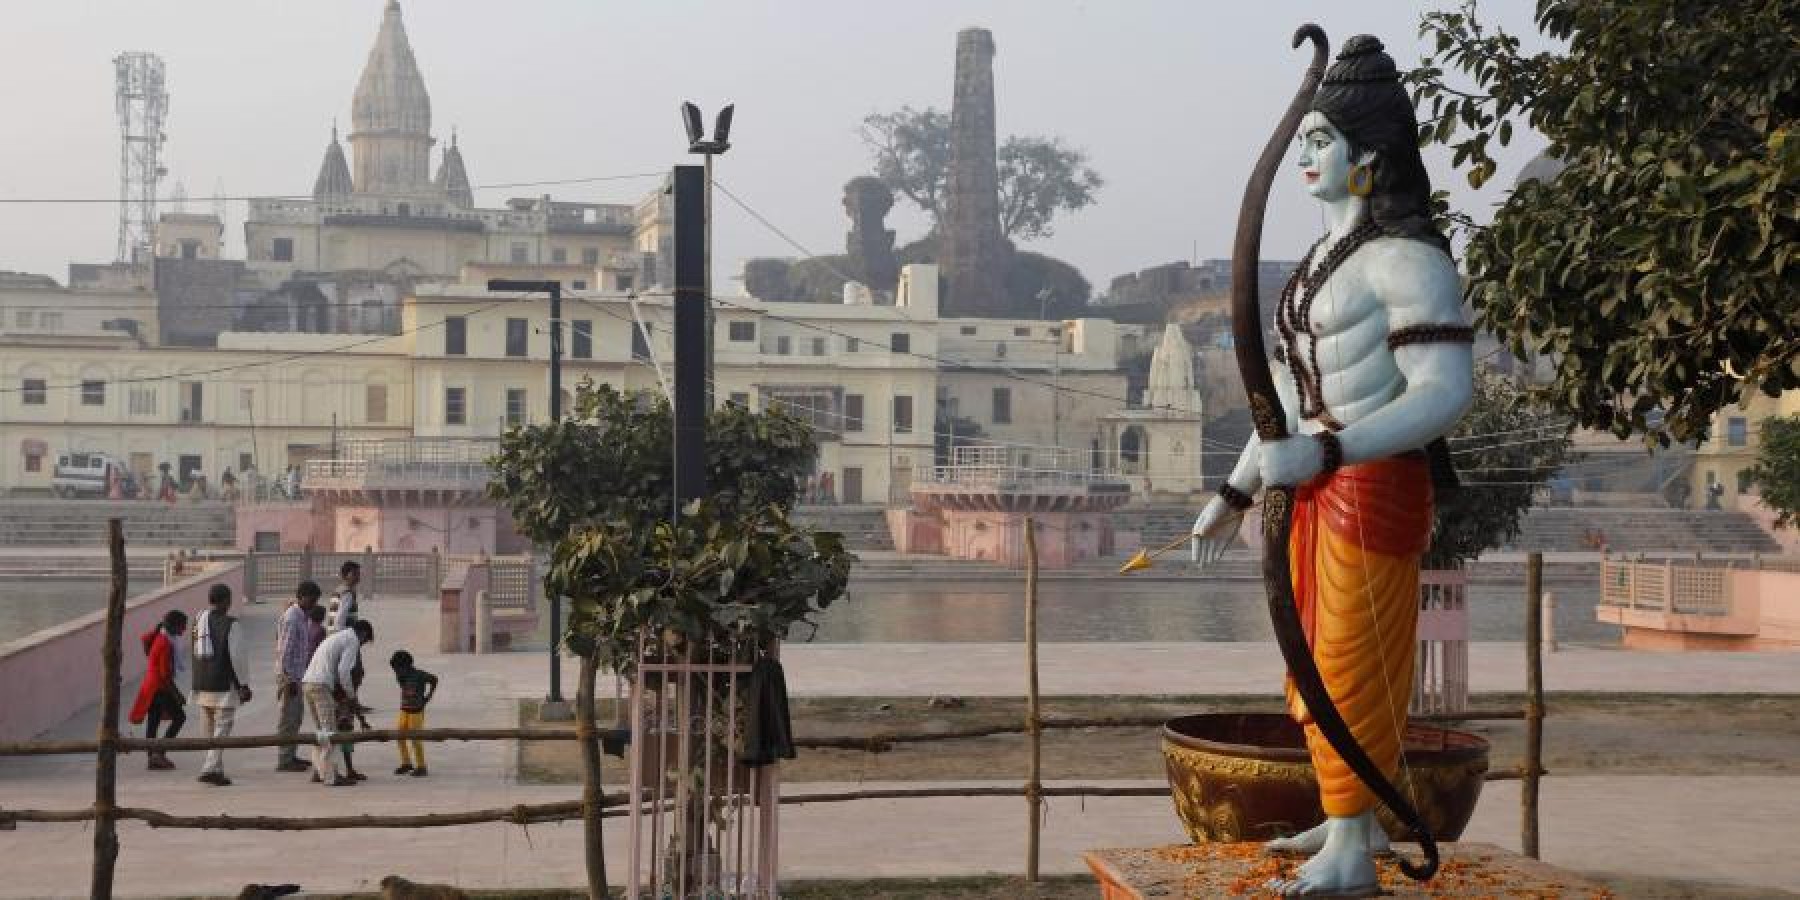 Construction of Ram temple will start in Ayodhya from Wednesday ...